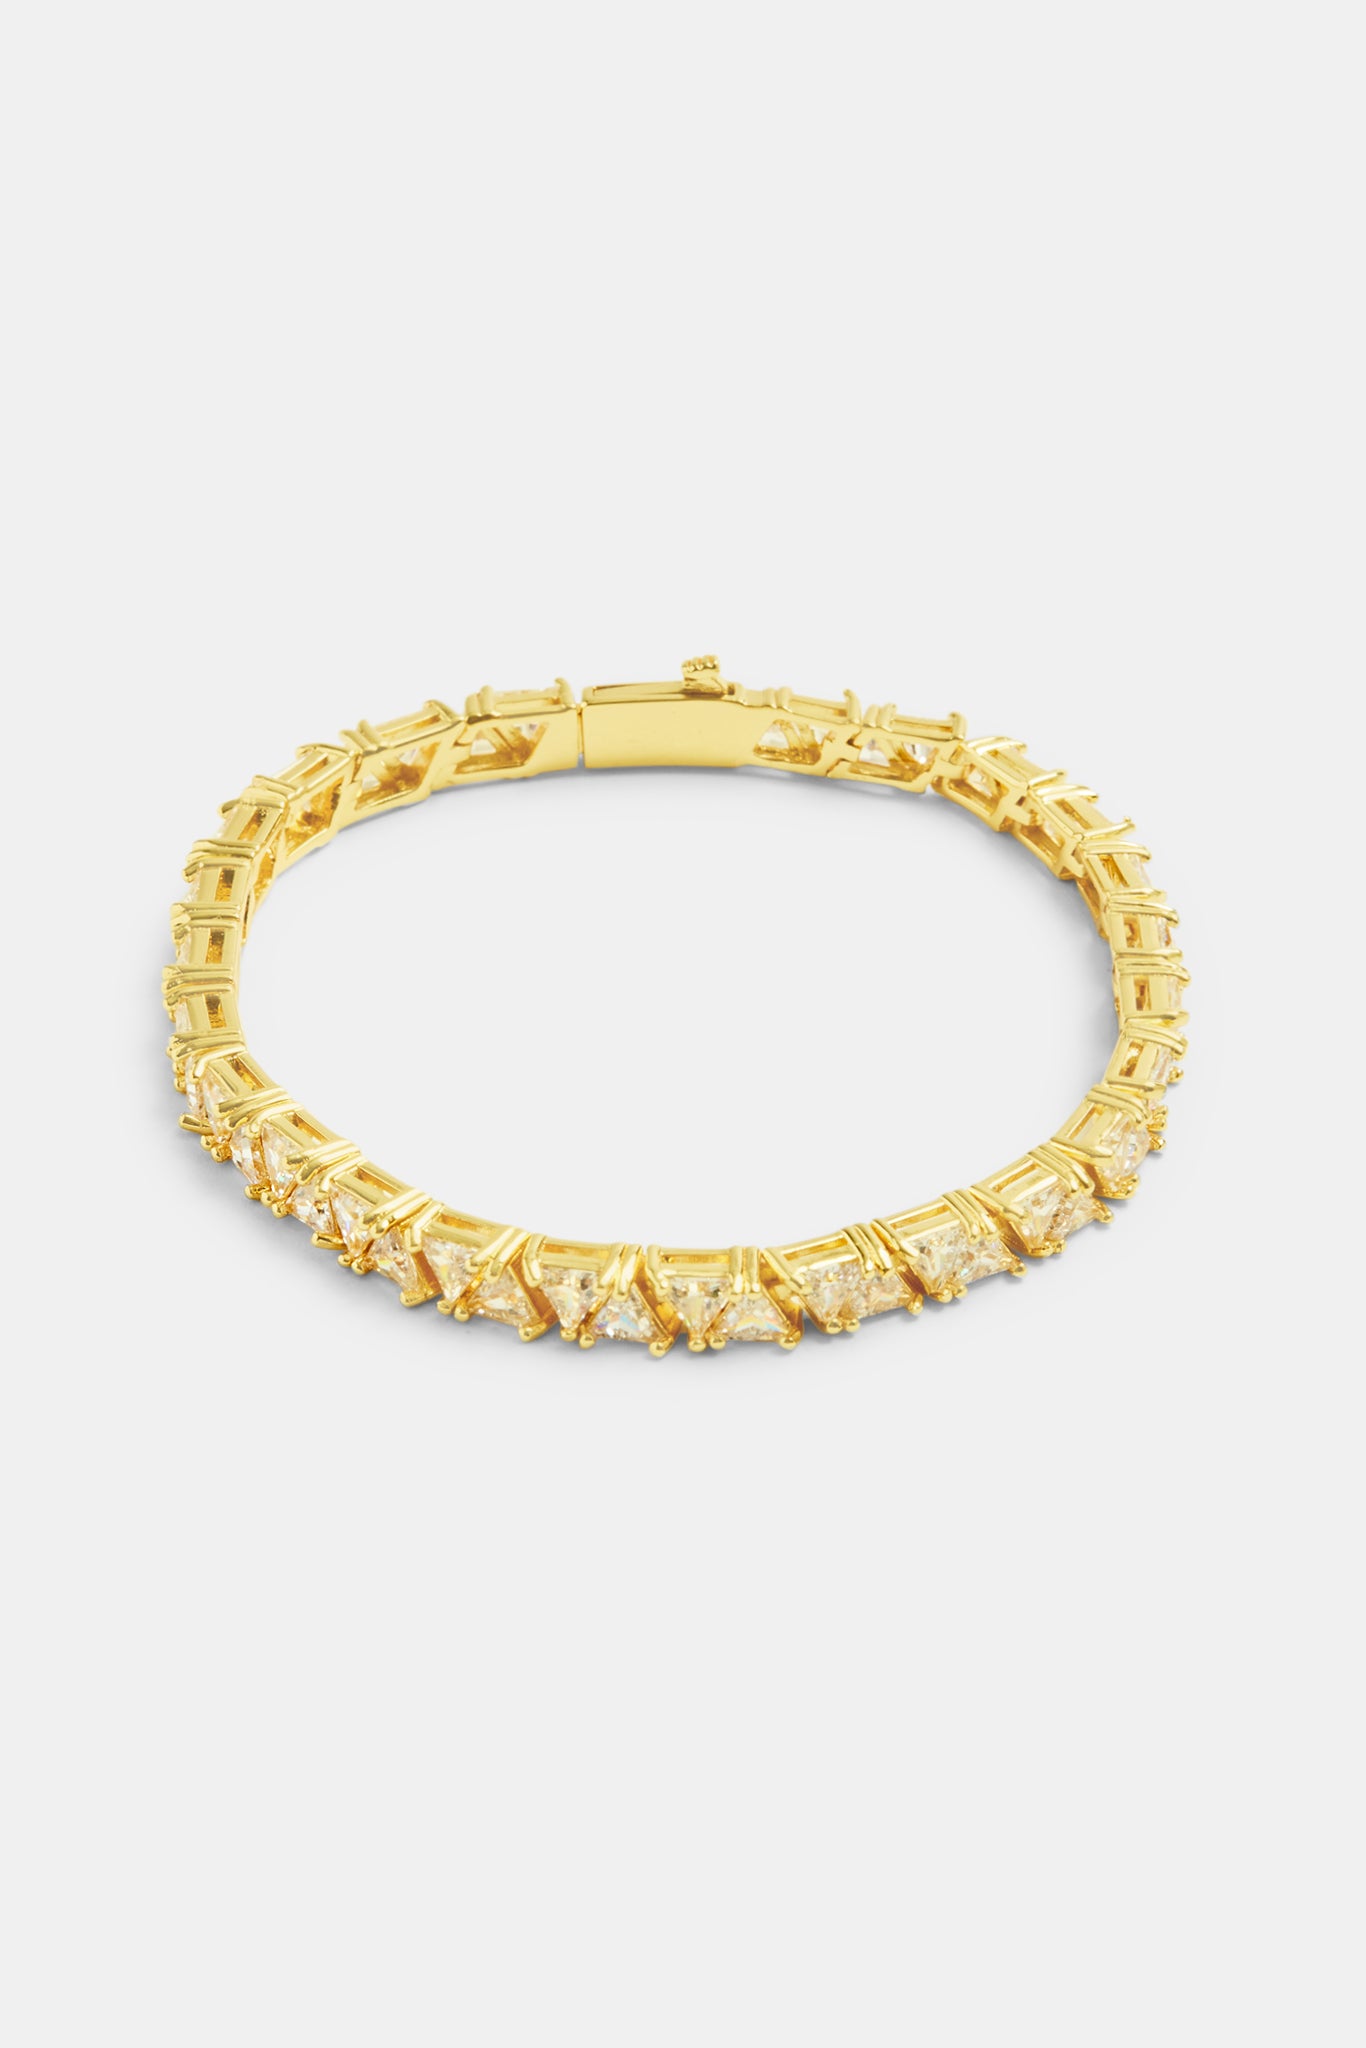 5mm Gold Plated Iced CZ Triangle Cut Tennis Bracelet